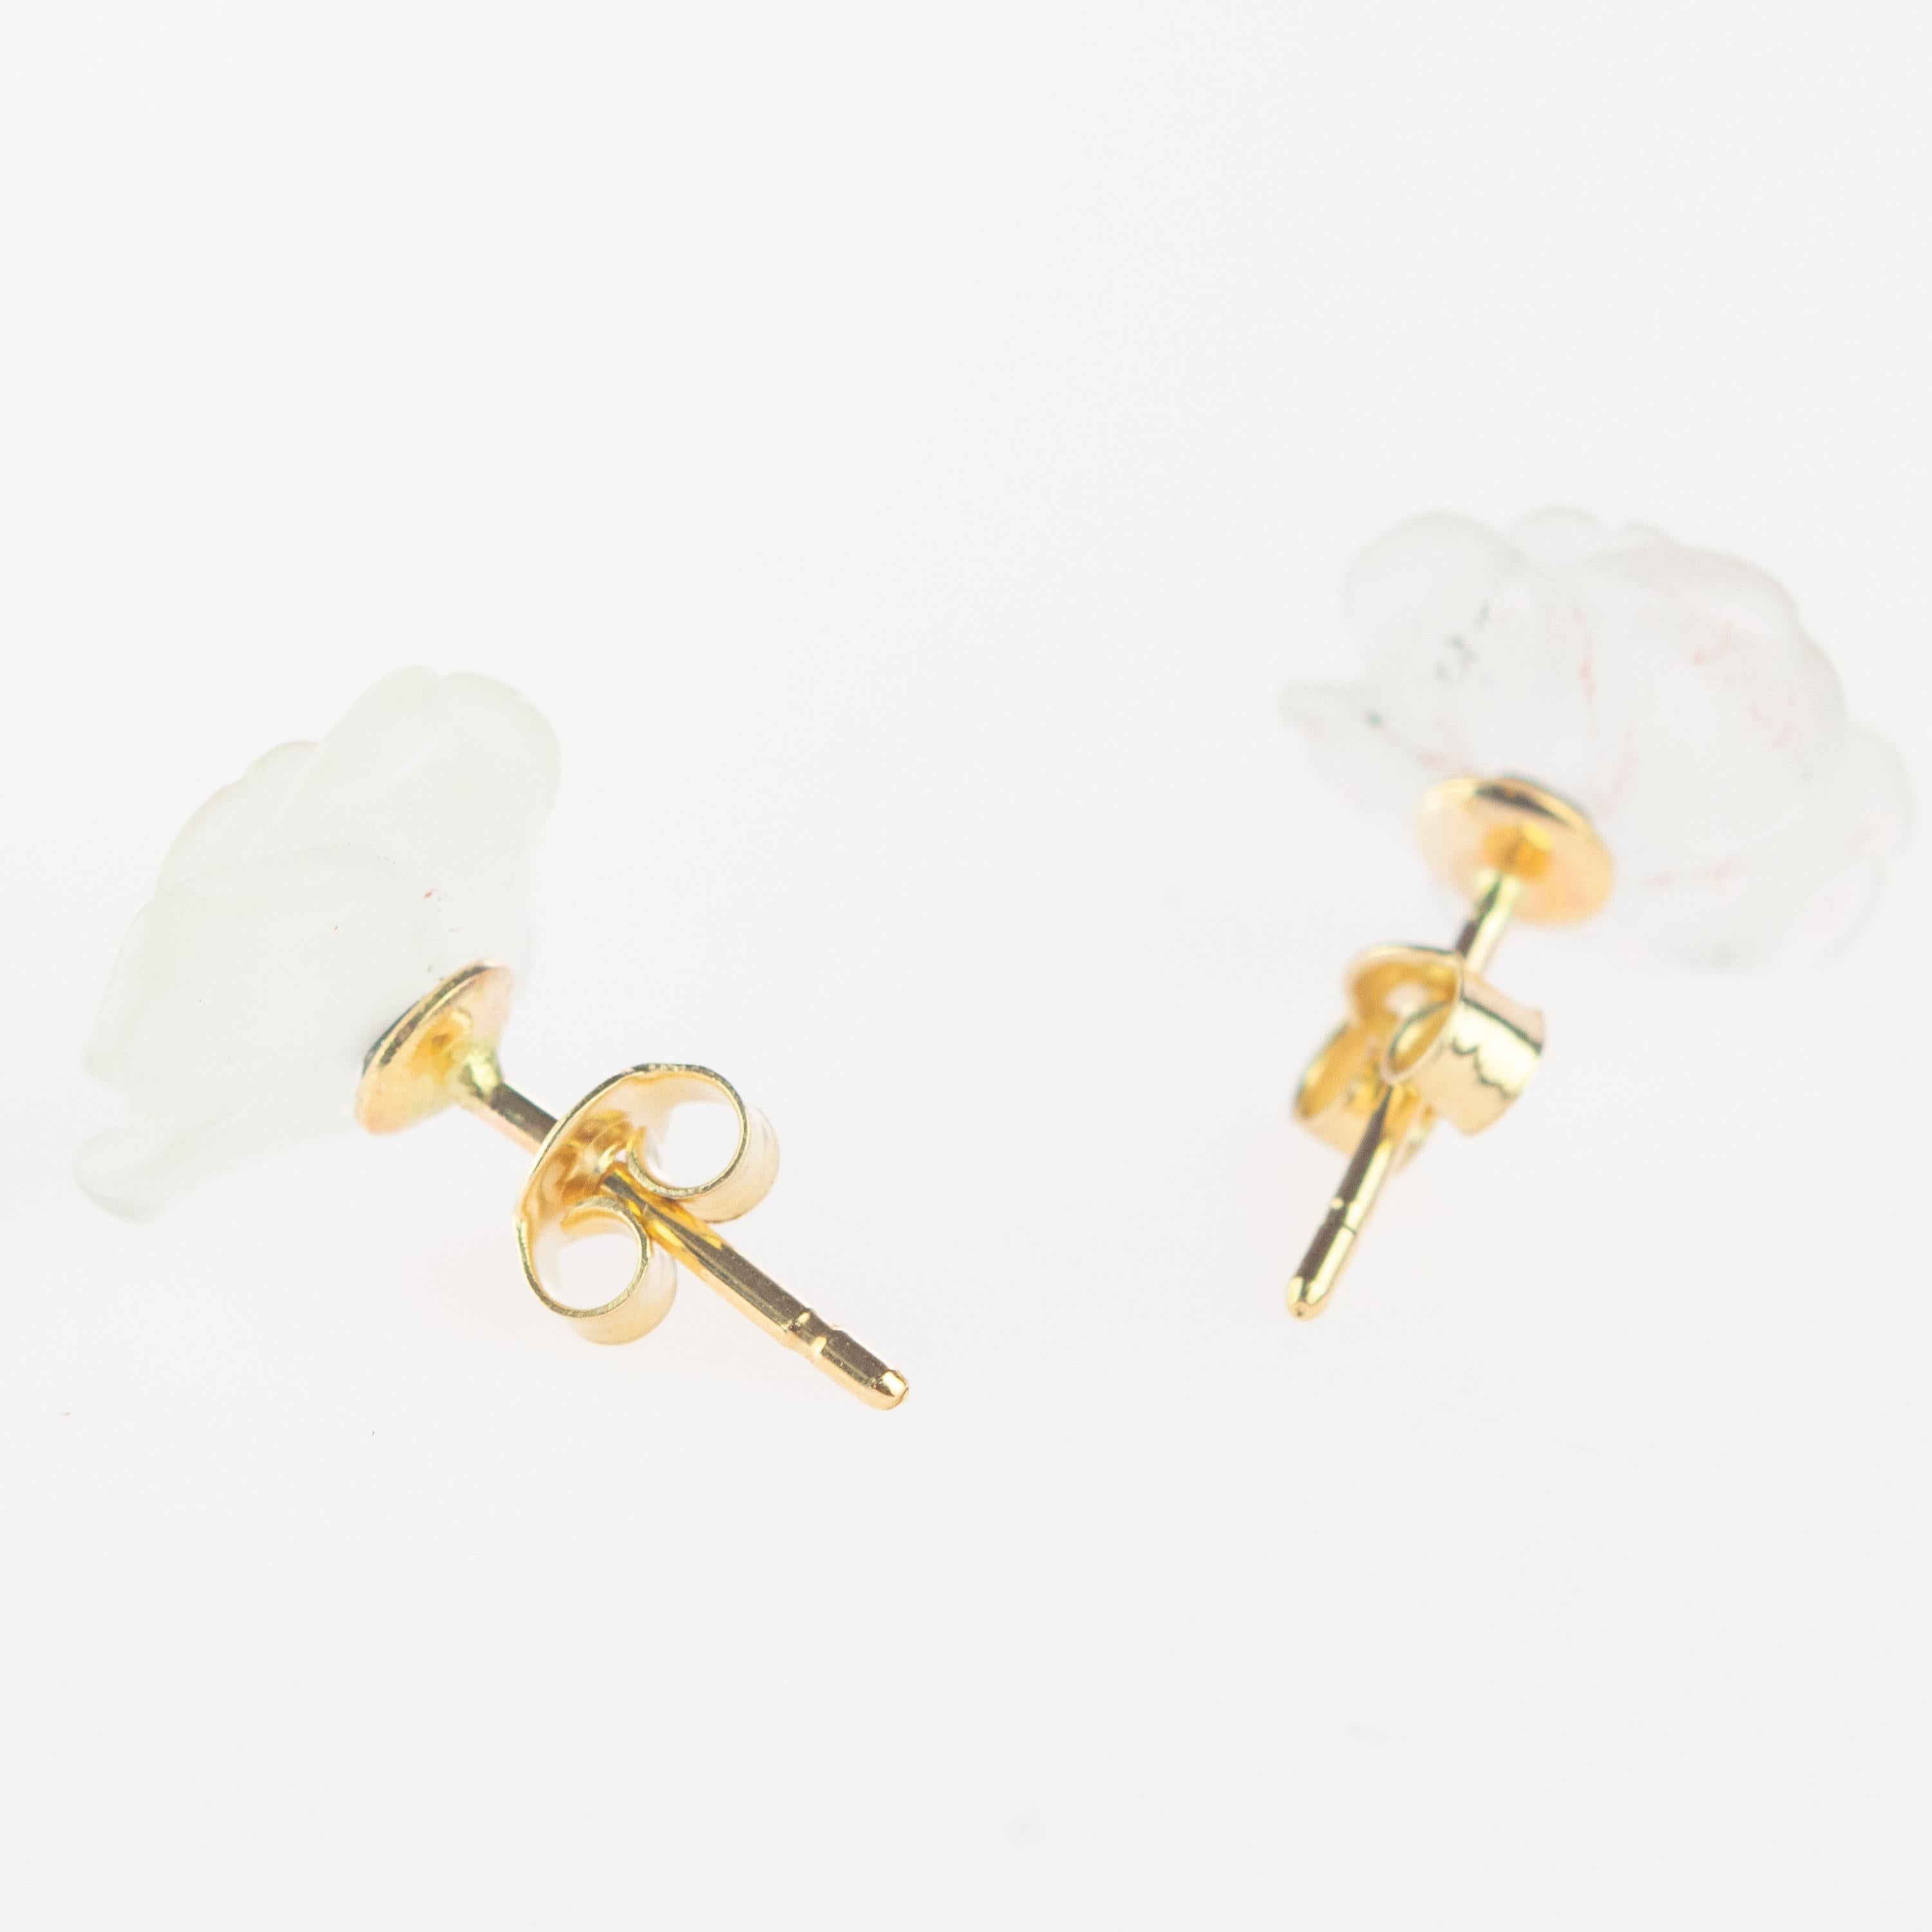 Astonishing and delicate 8ct rock crystal flower. Stud earrings embellished with a modern and exquisite style. Carved petals that evoke the italian handmade traditional jewelry work, wrapping itself in a soft look enriched with 14 karat yellow gold